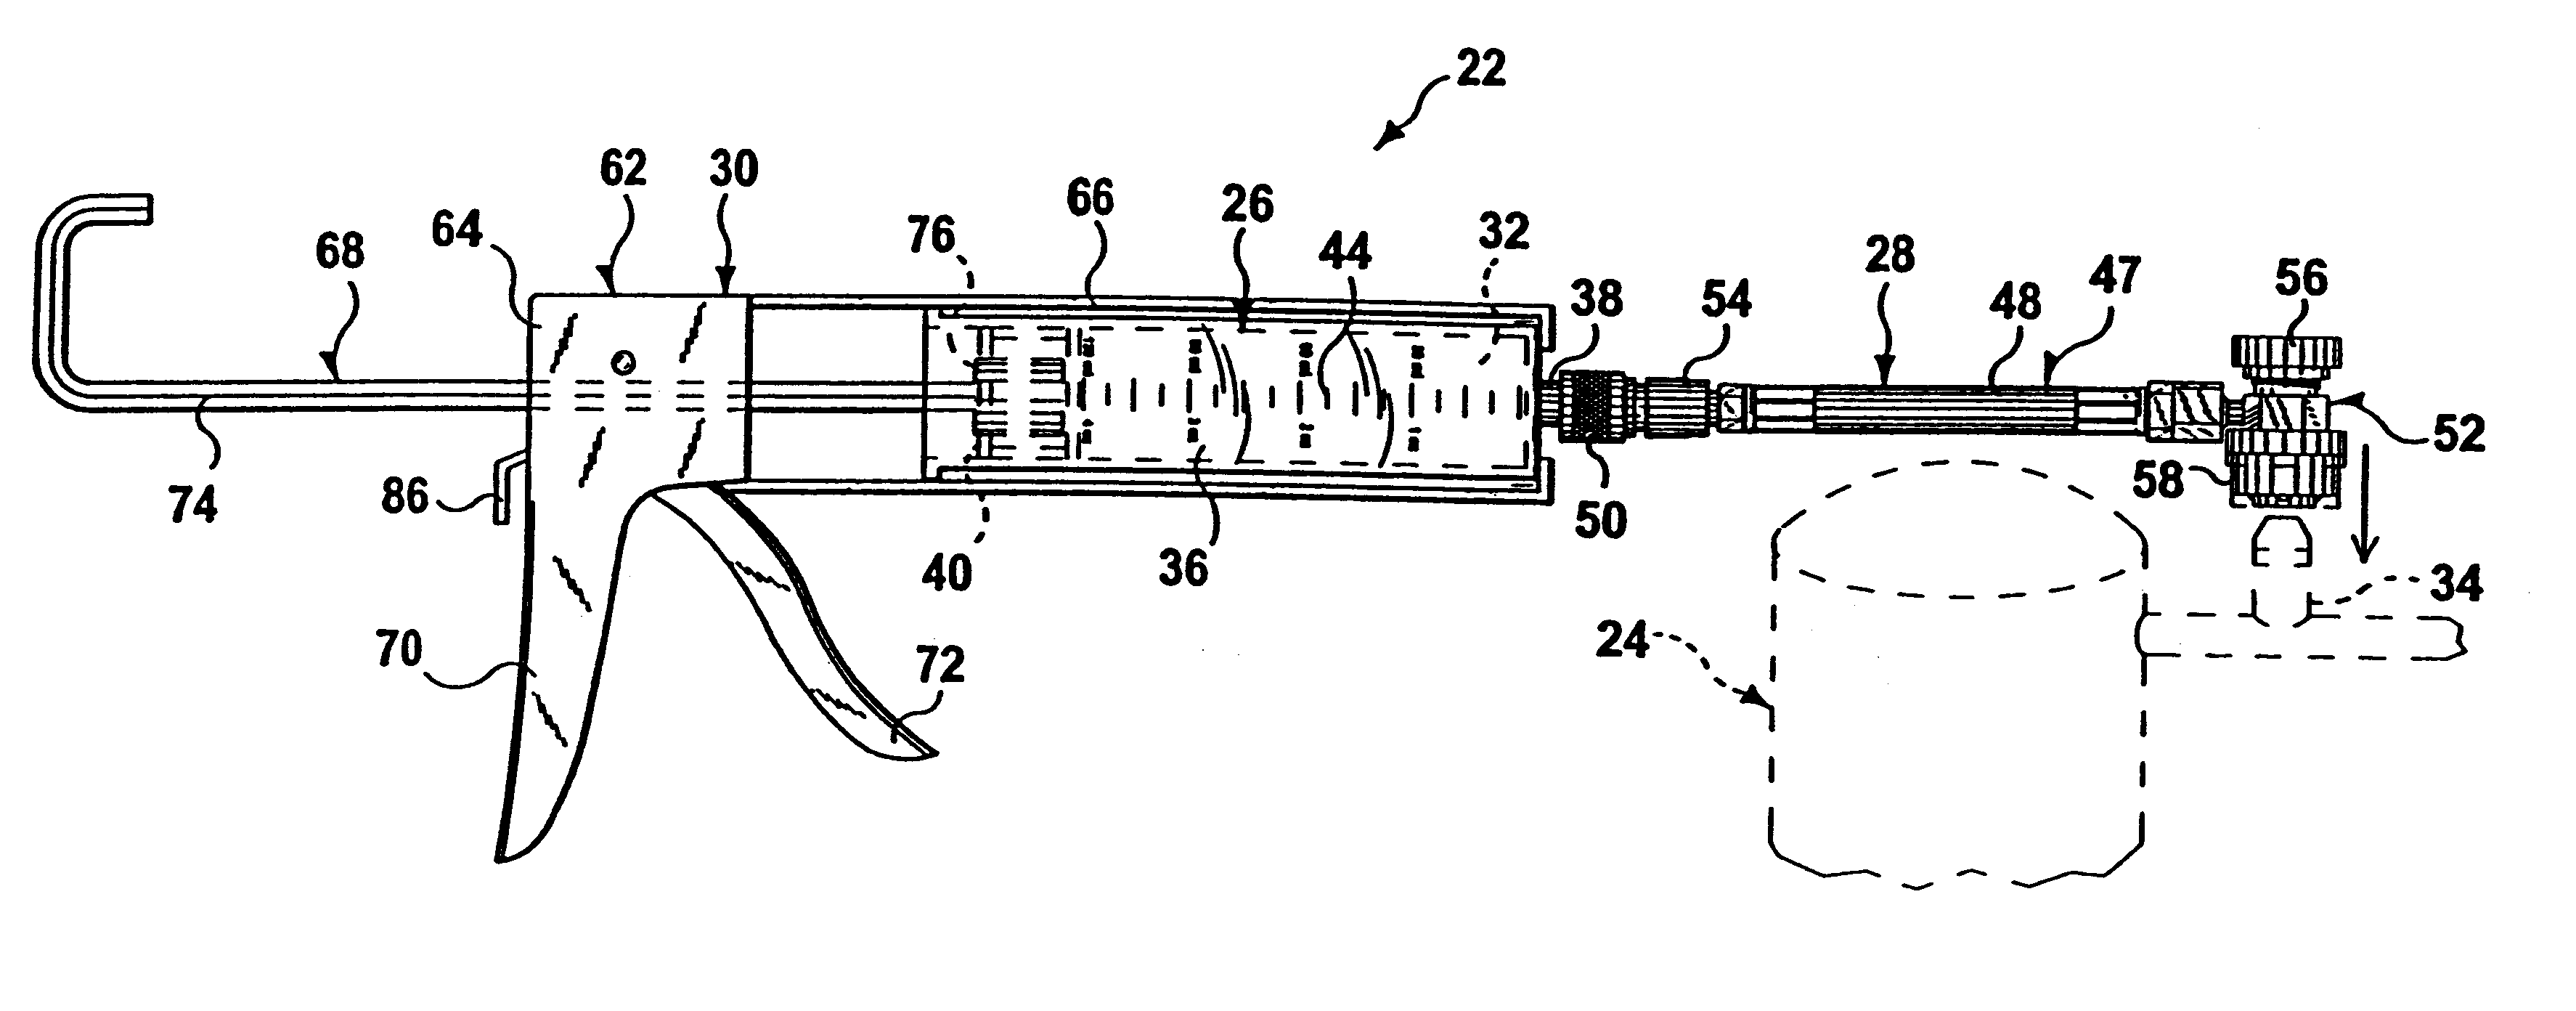 Apparatus for detecting leaks in a pressurized air conditioning or refrigeration system